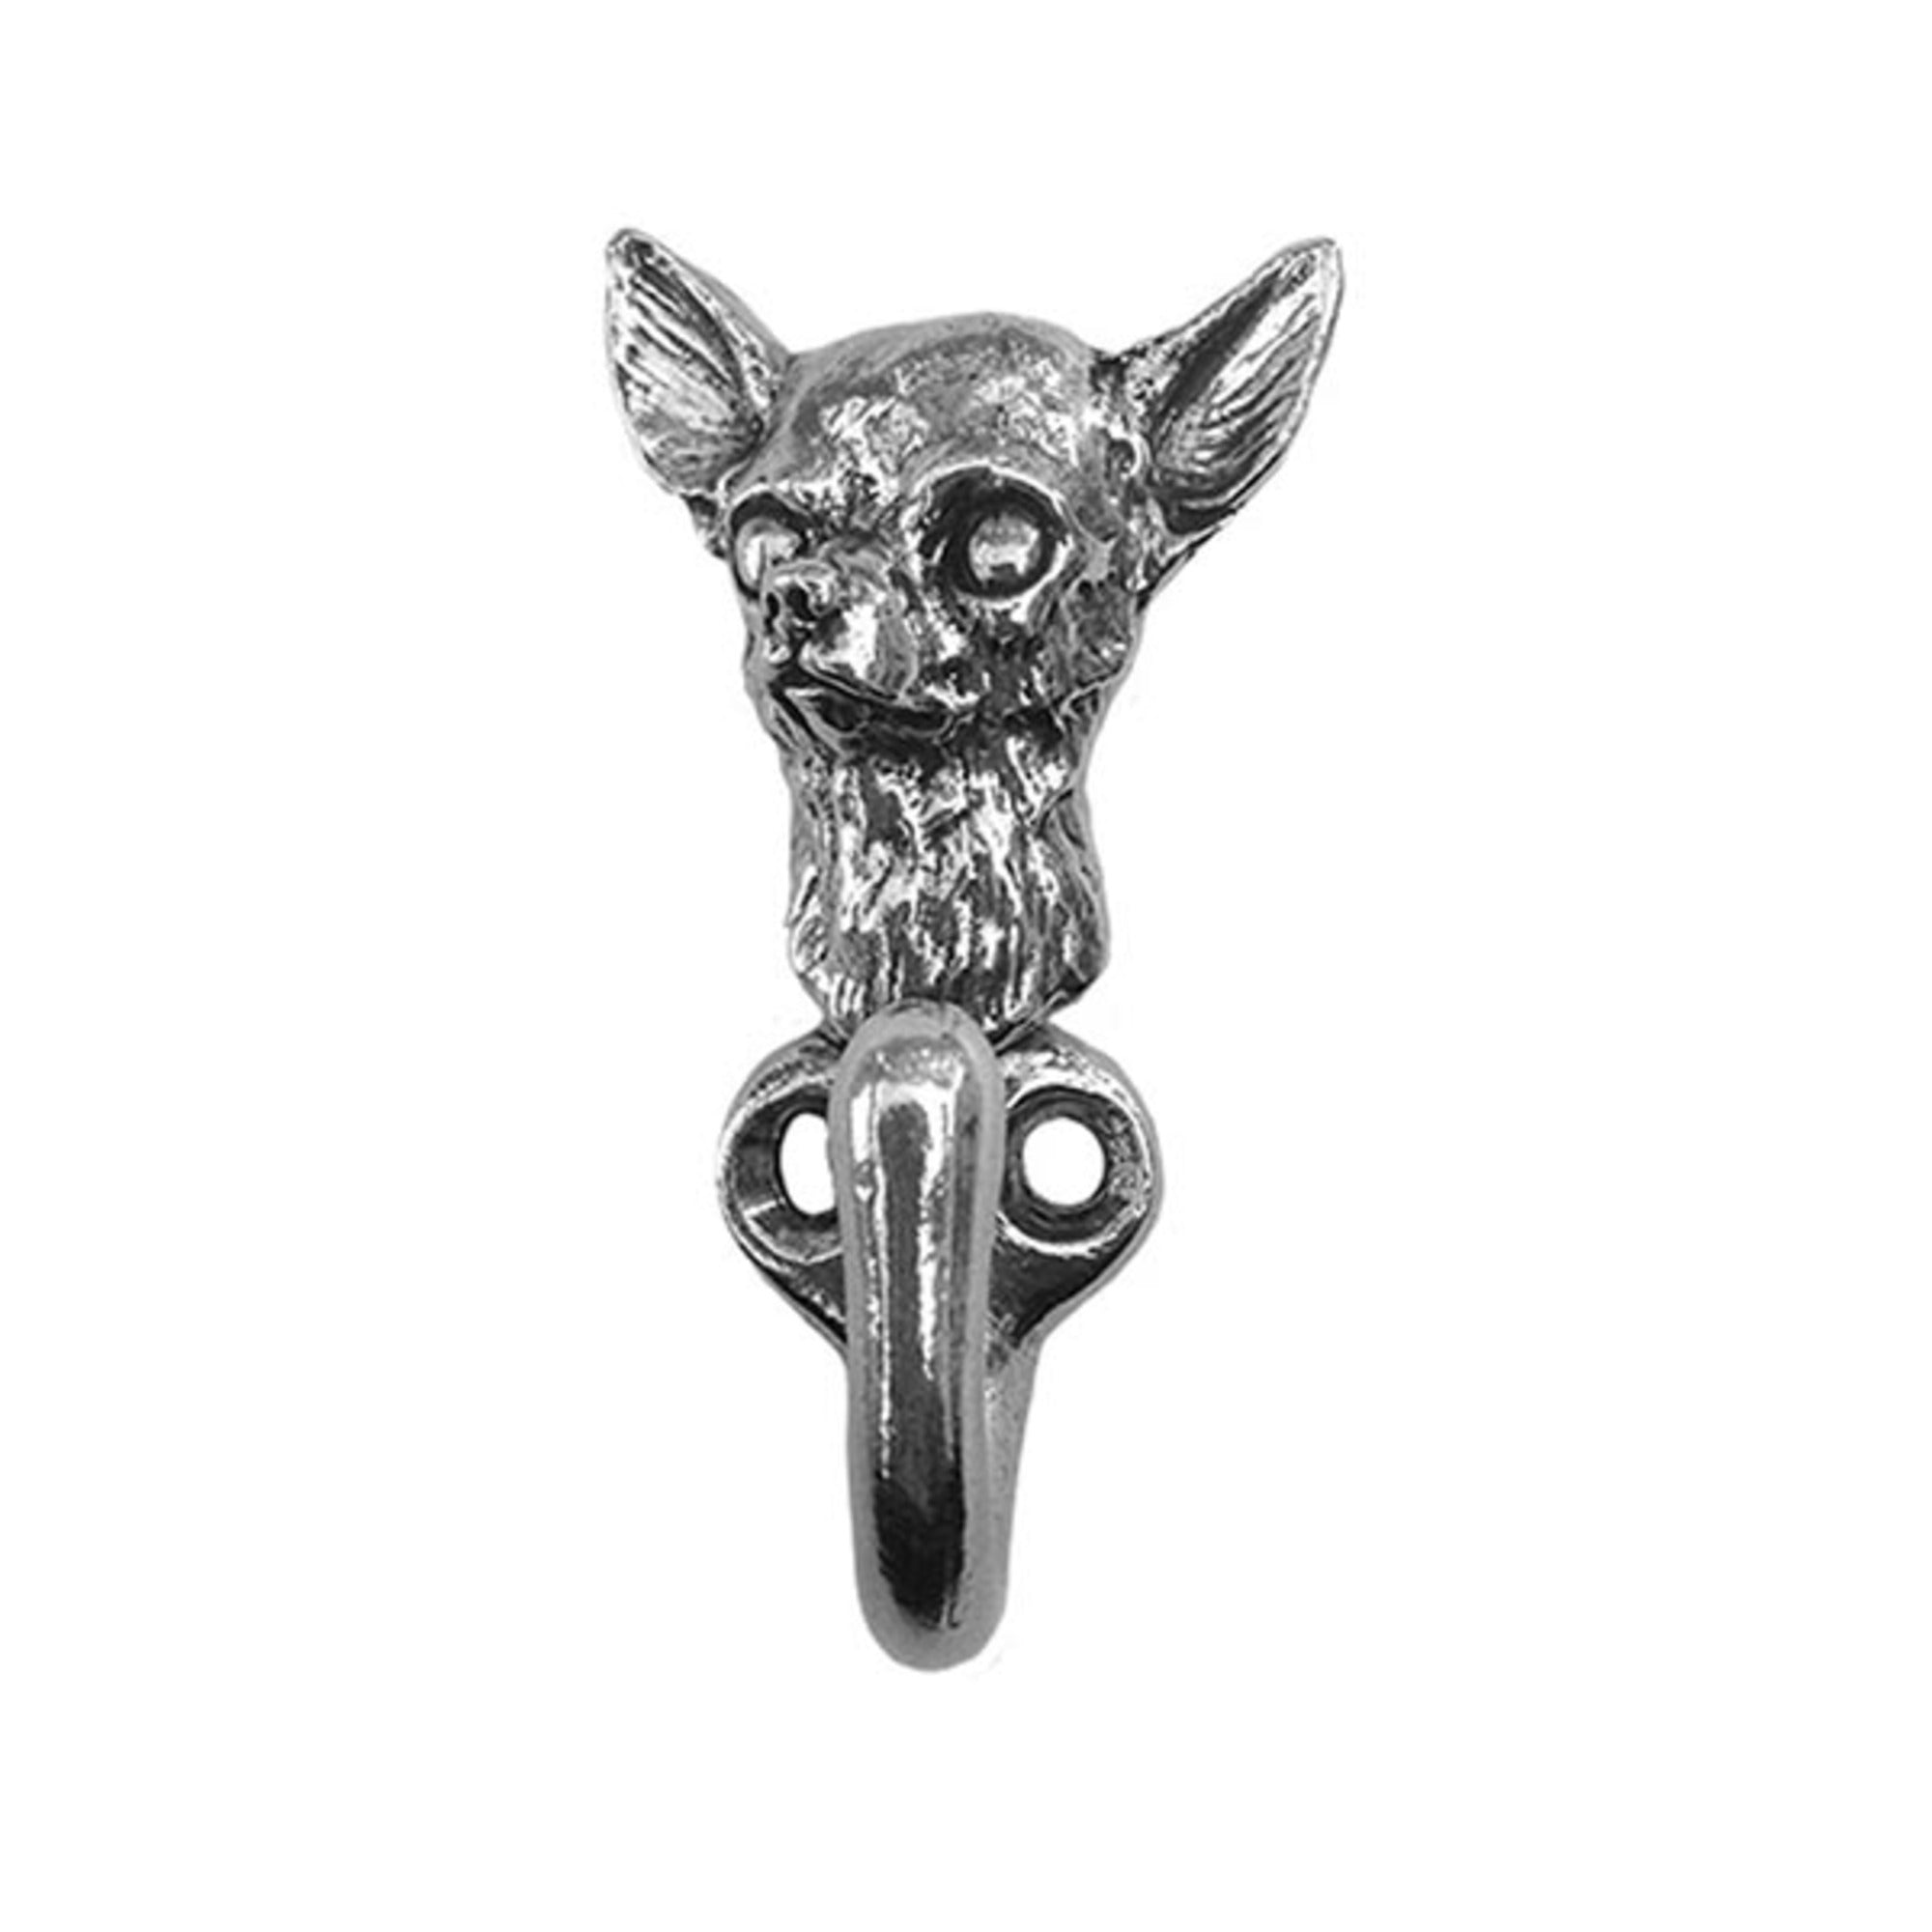 New-Spin Metal Casting Chihuahua Leash Hook